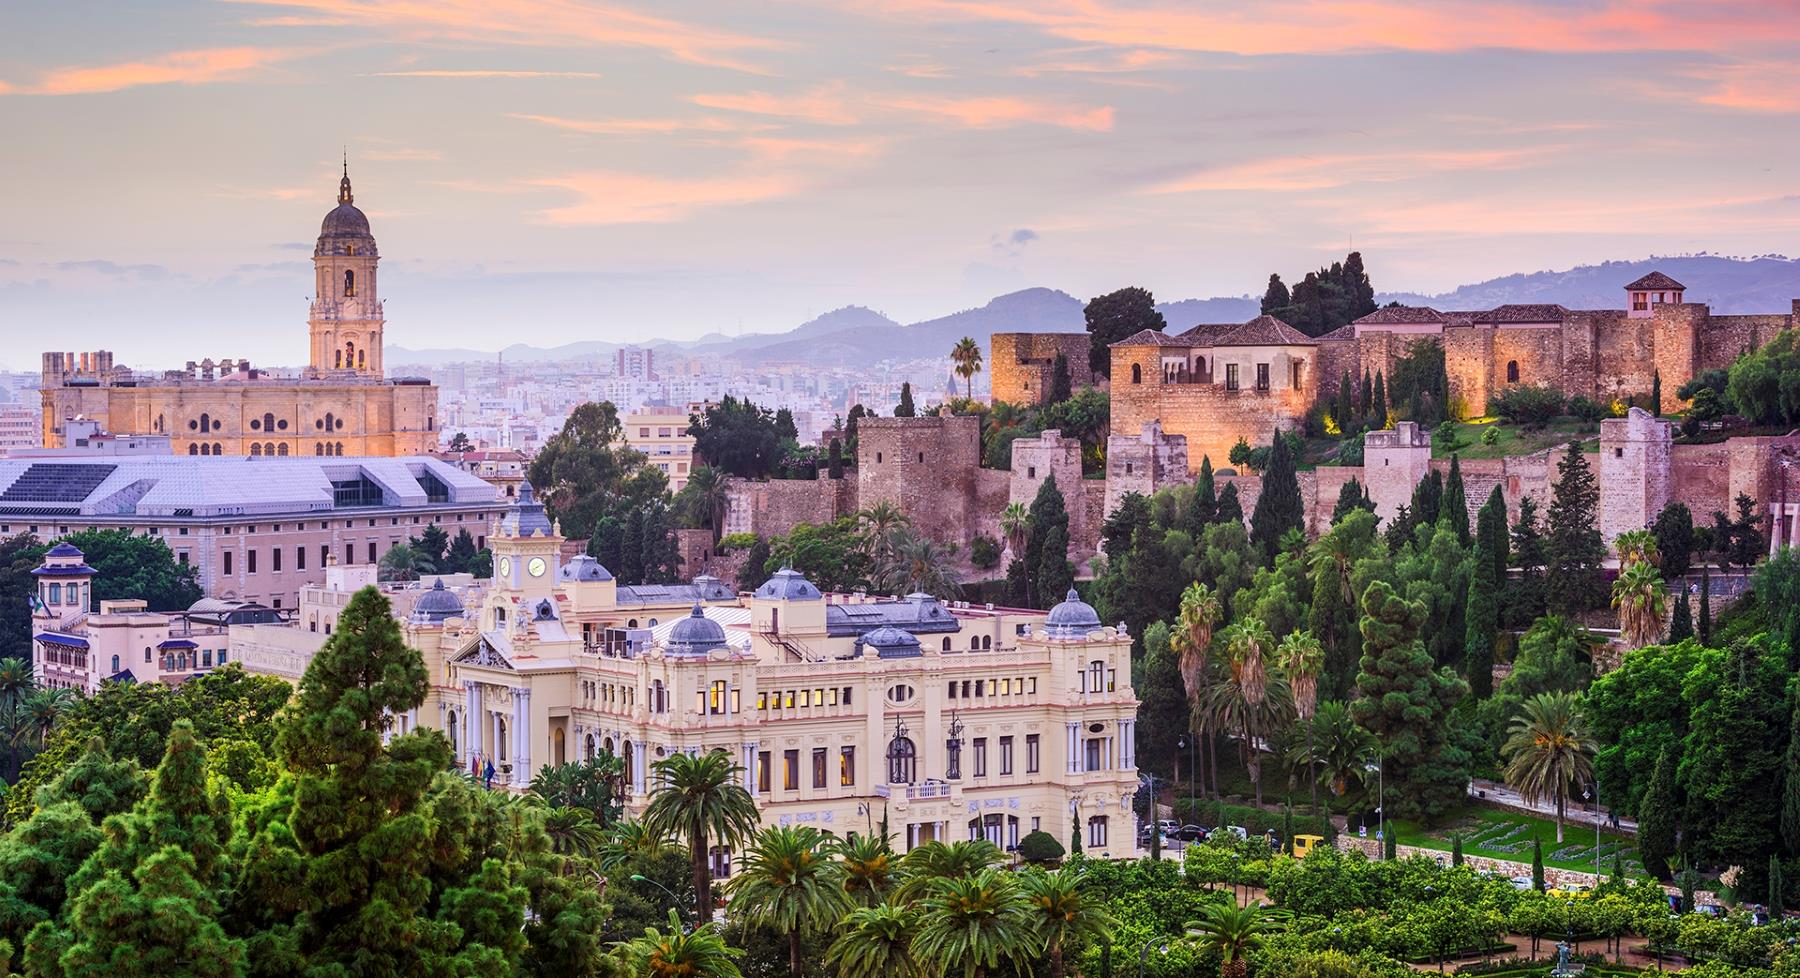 Malaga Free Tour: The Most Complete